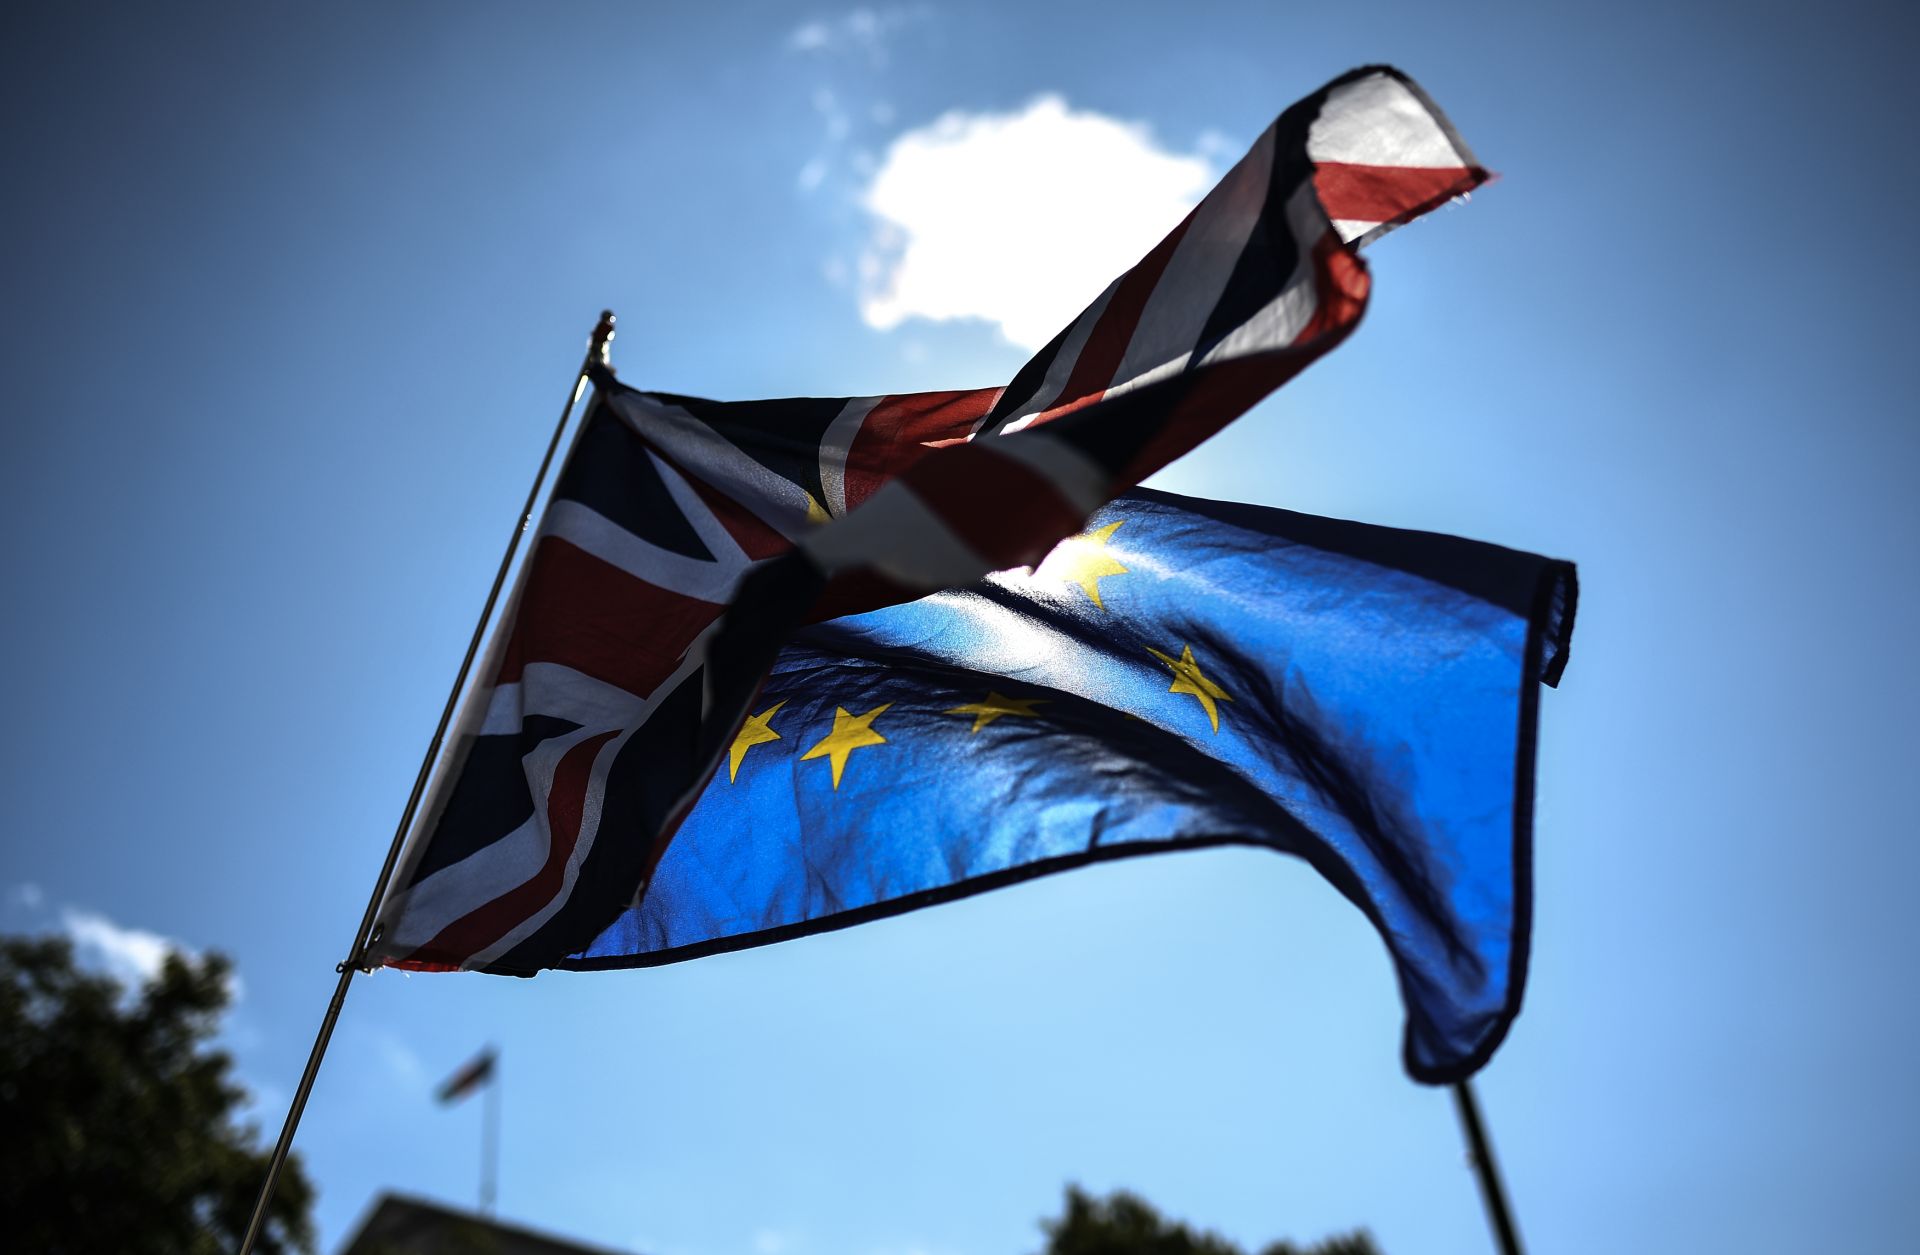 The Union Jack and the European Union flag wave outside the British Cabinet Office in London on Aug. 29, 2019, as protesters rally against Prime Minister Boris Johnson's suspension of Parliament.